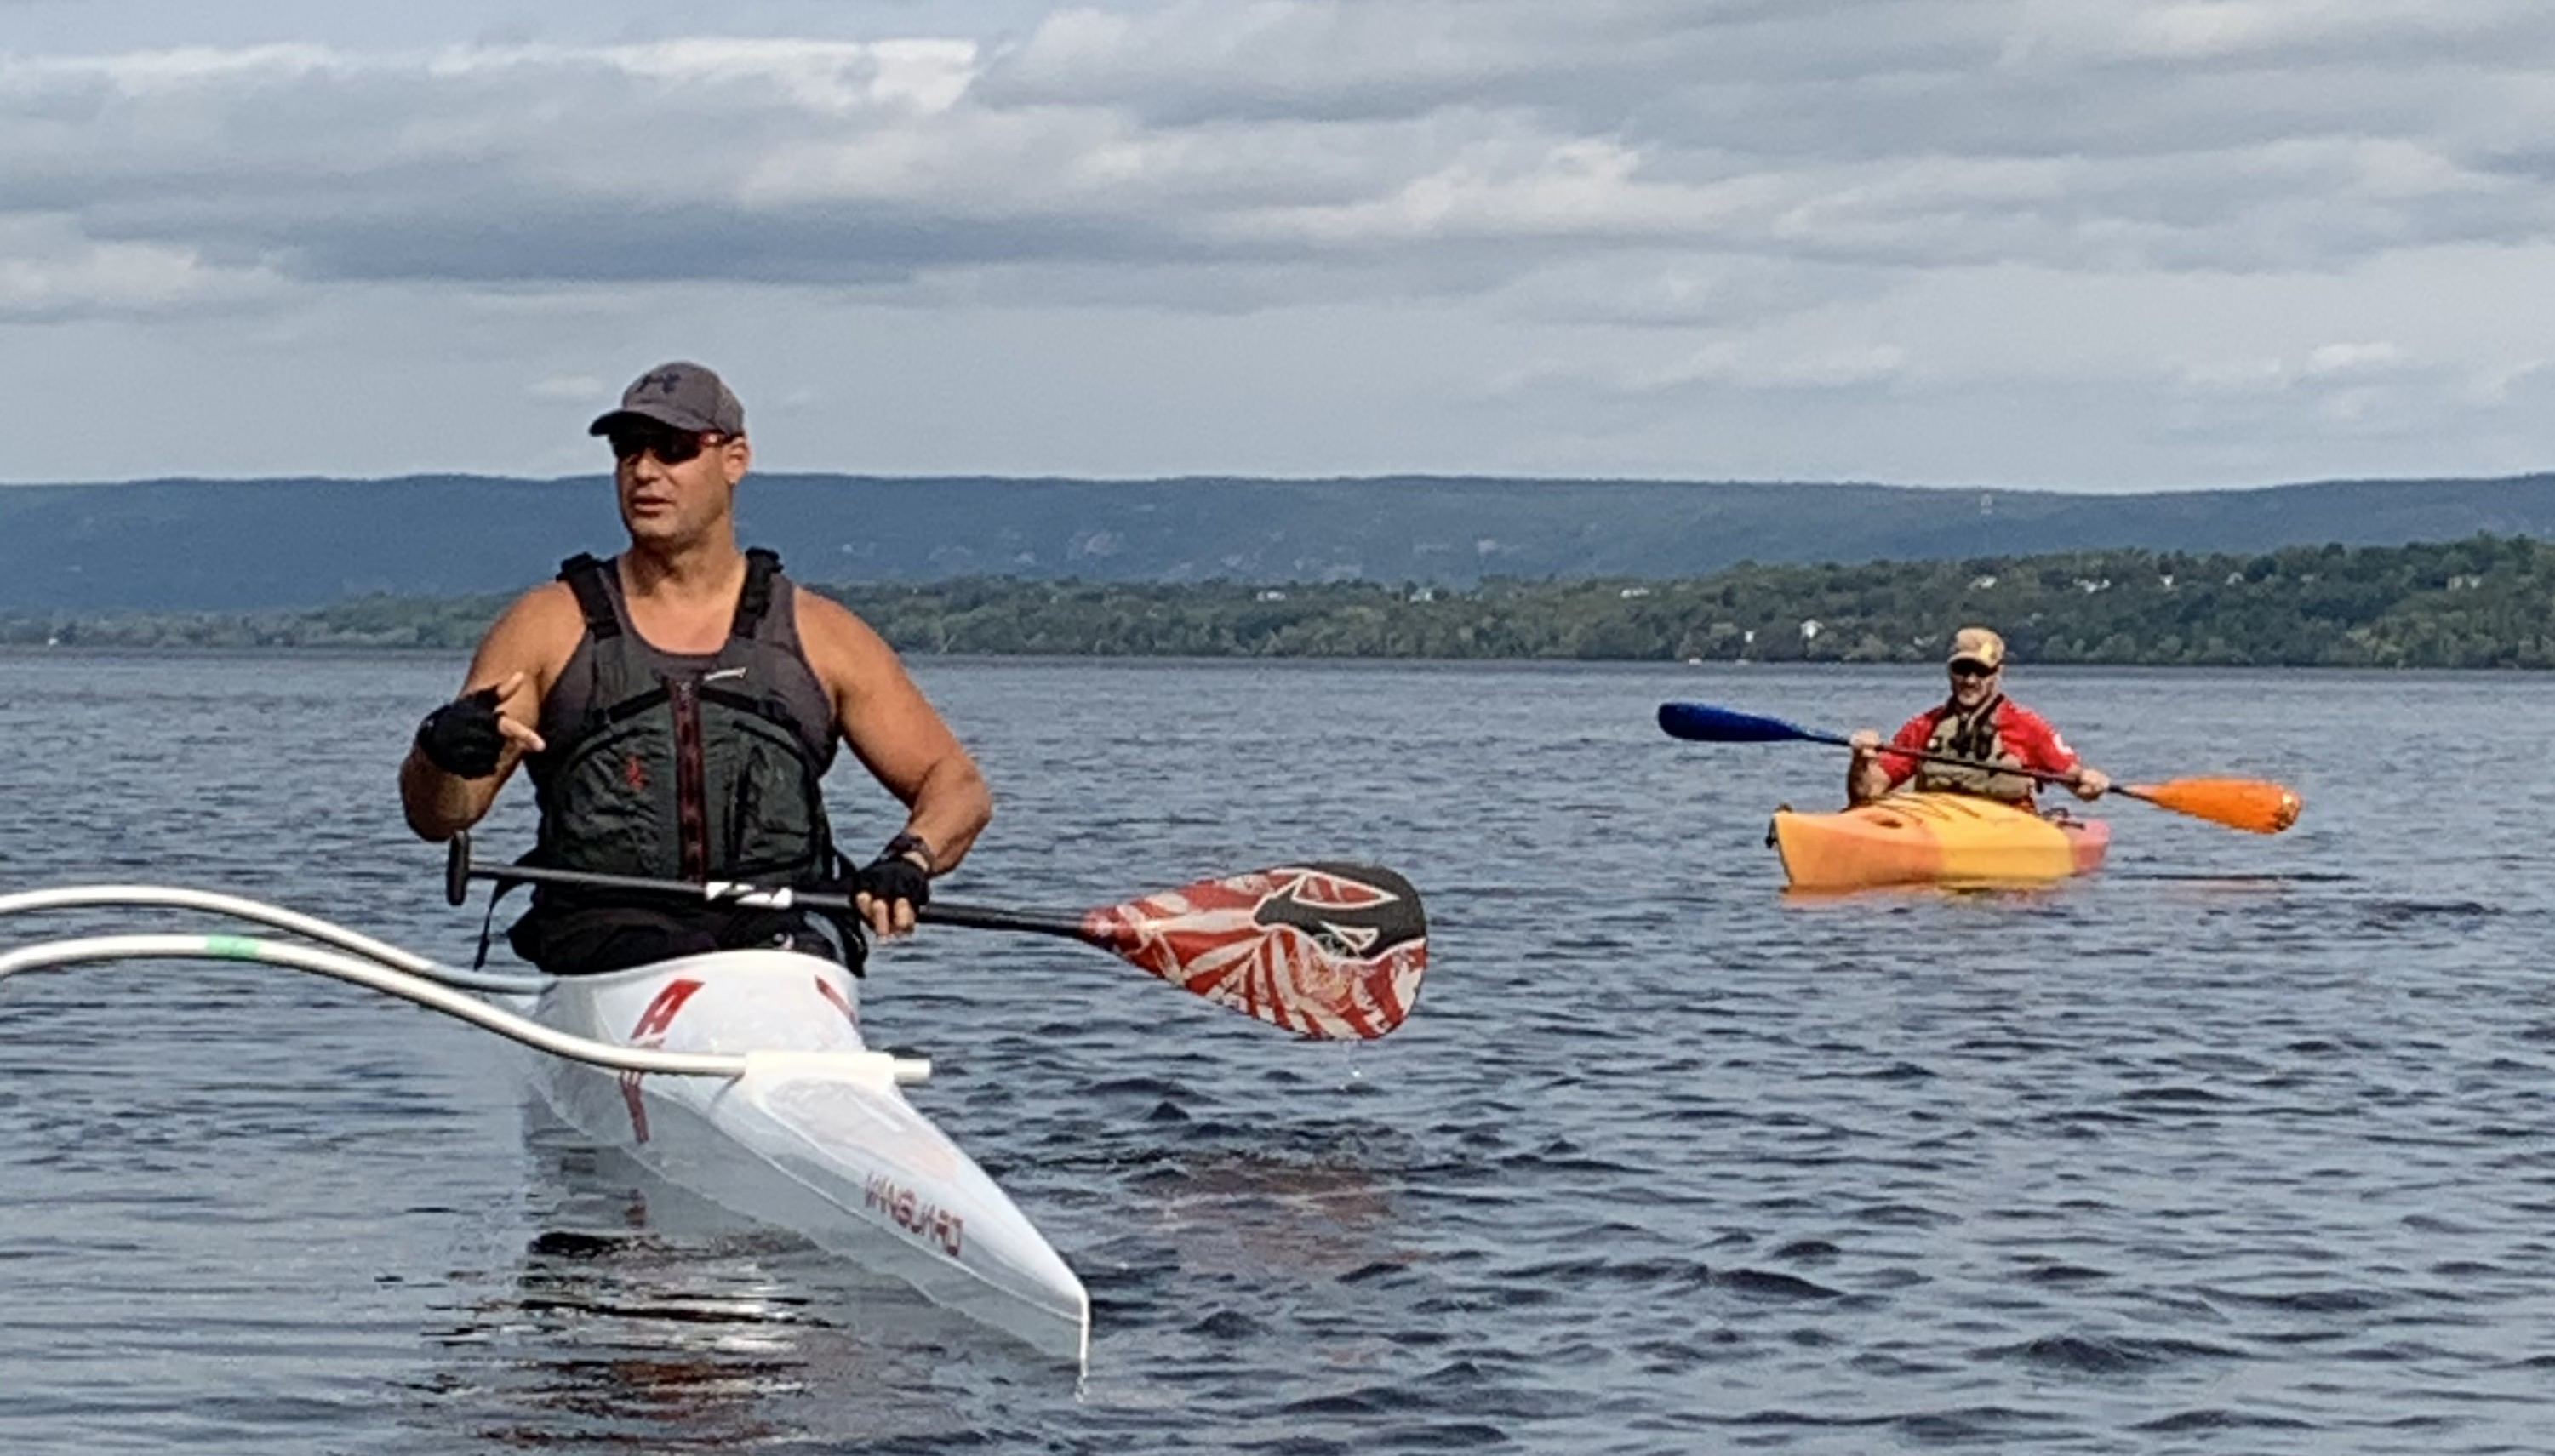 Mike Trauner Joins Members on Kayaking Expedition Image